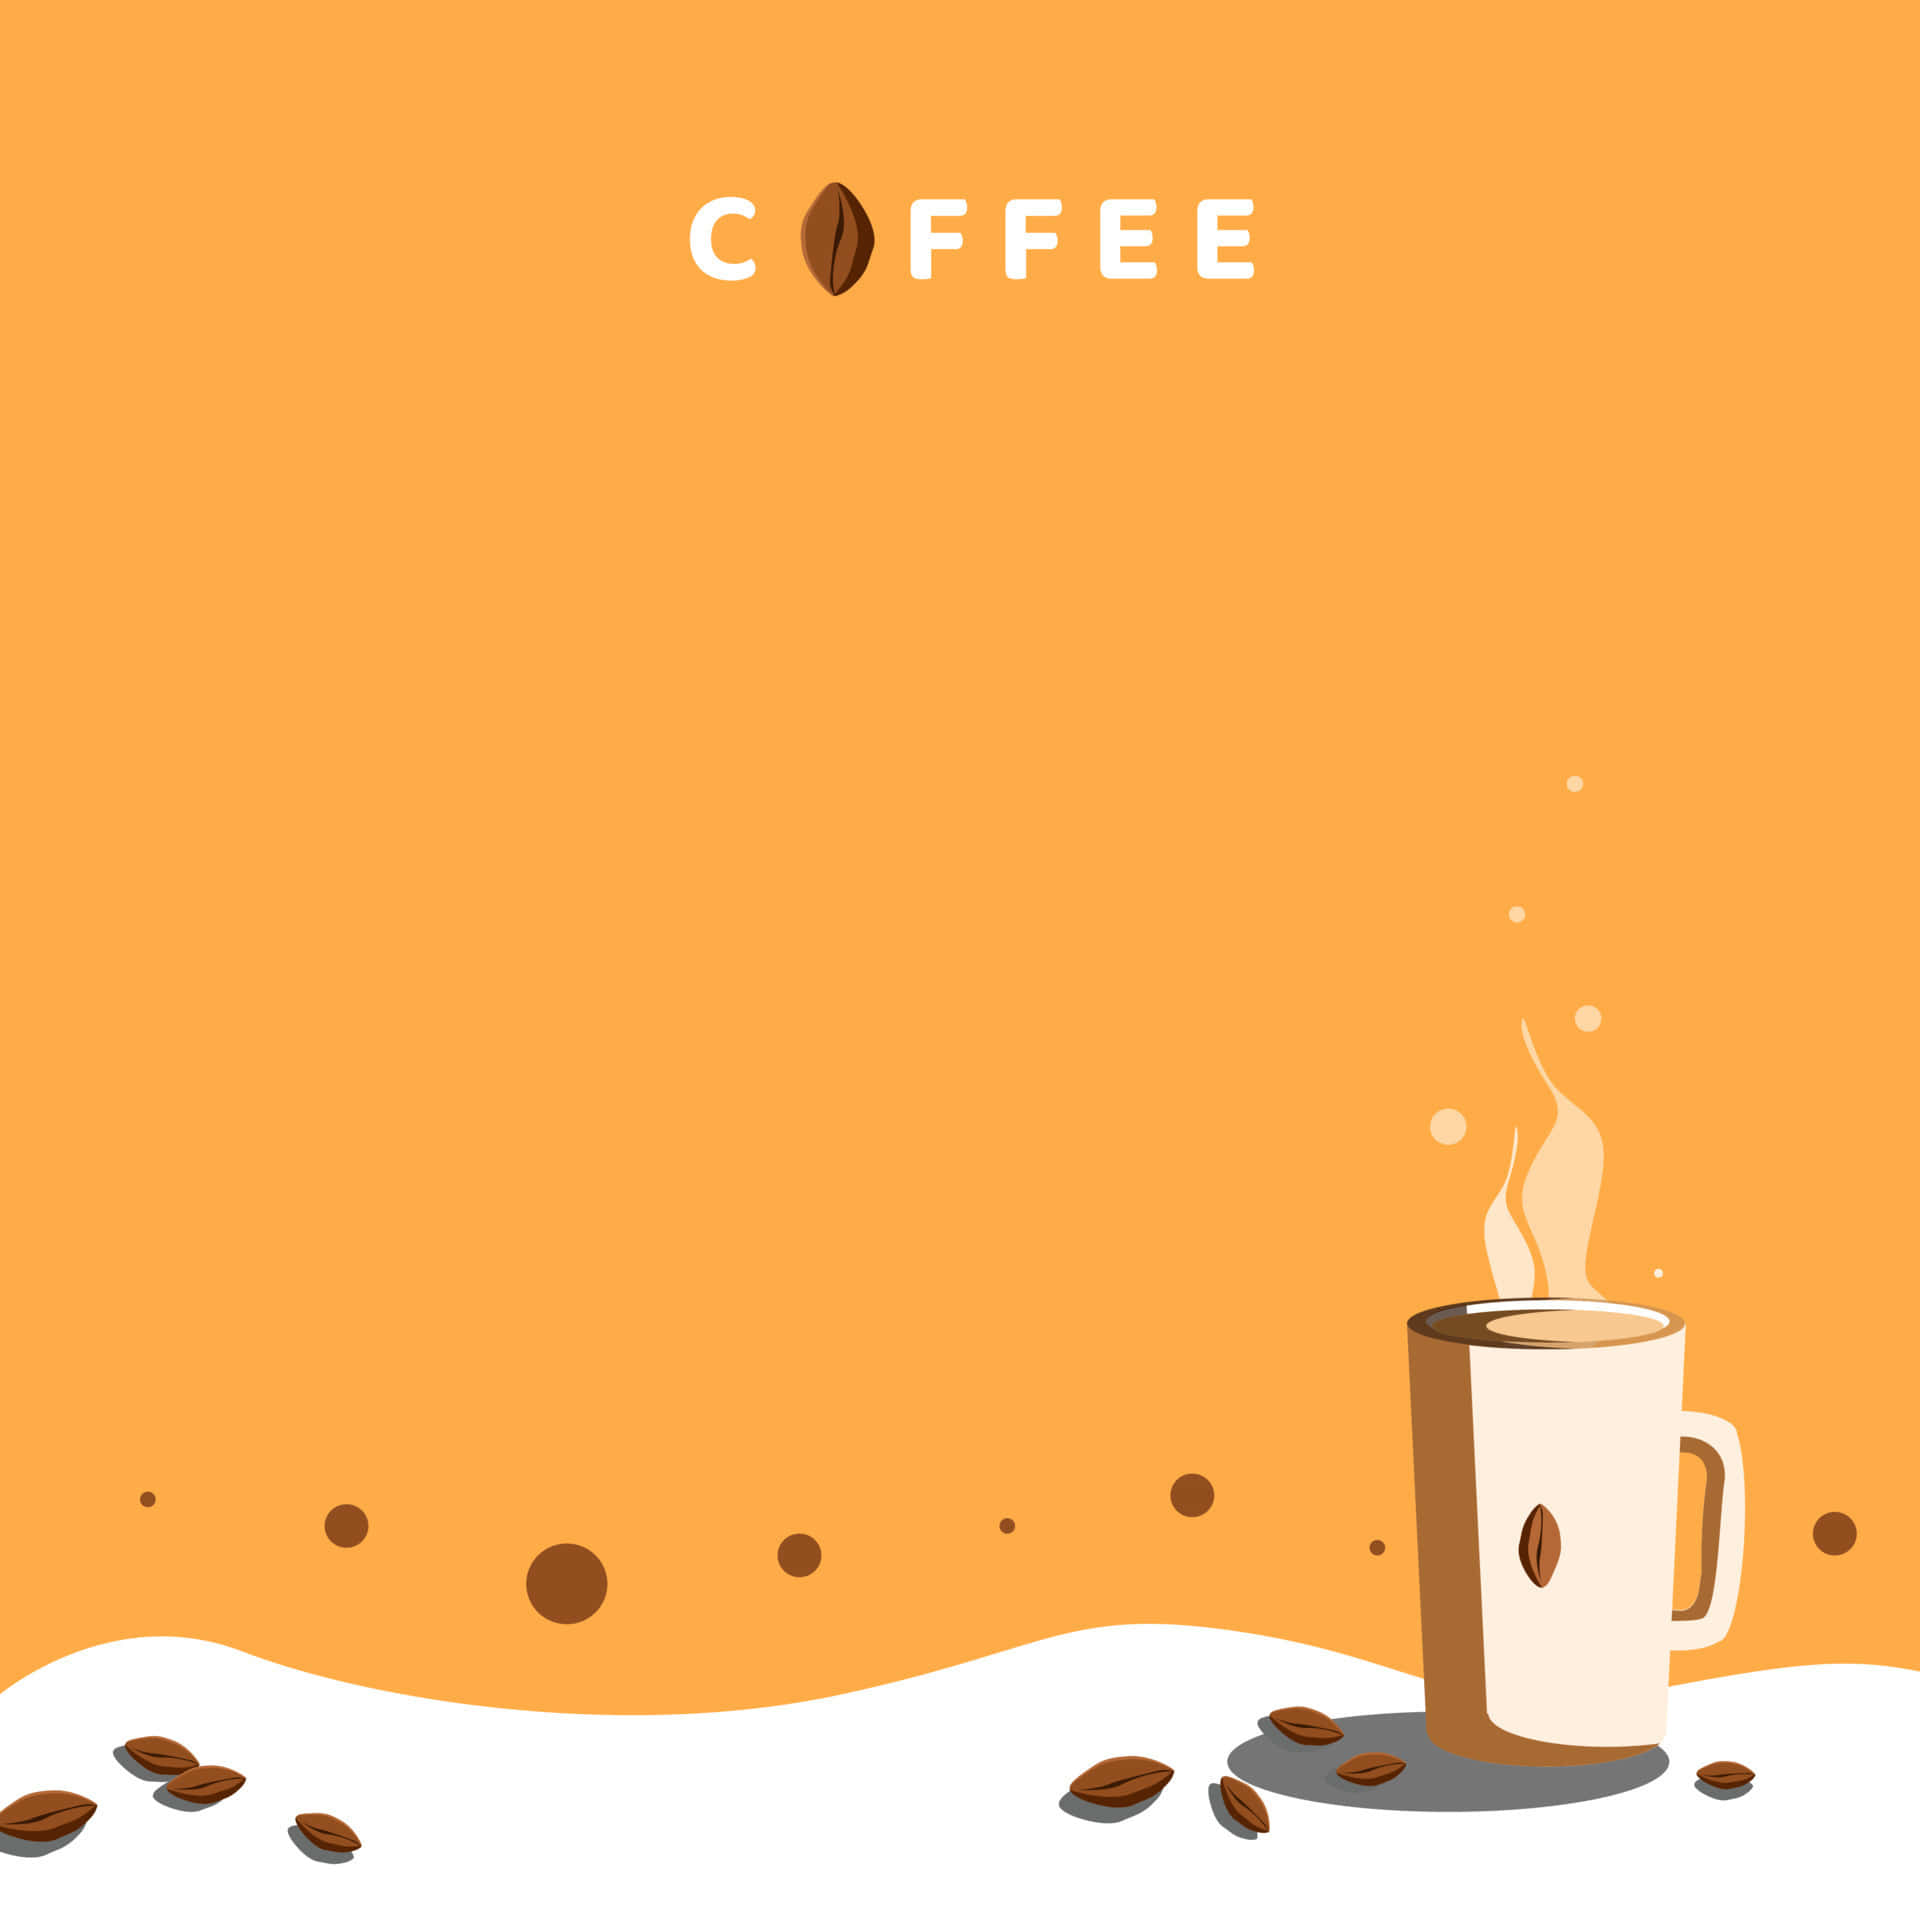 Take a break and indulge in a tasty cup of Cute Coffee! Wallpaper